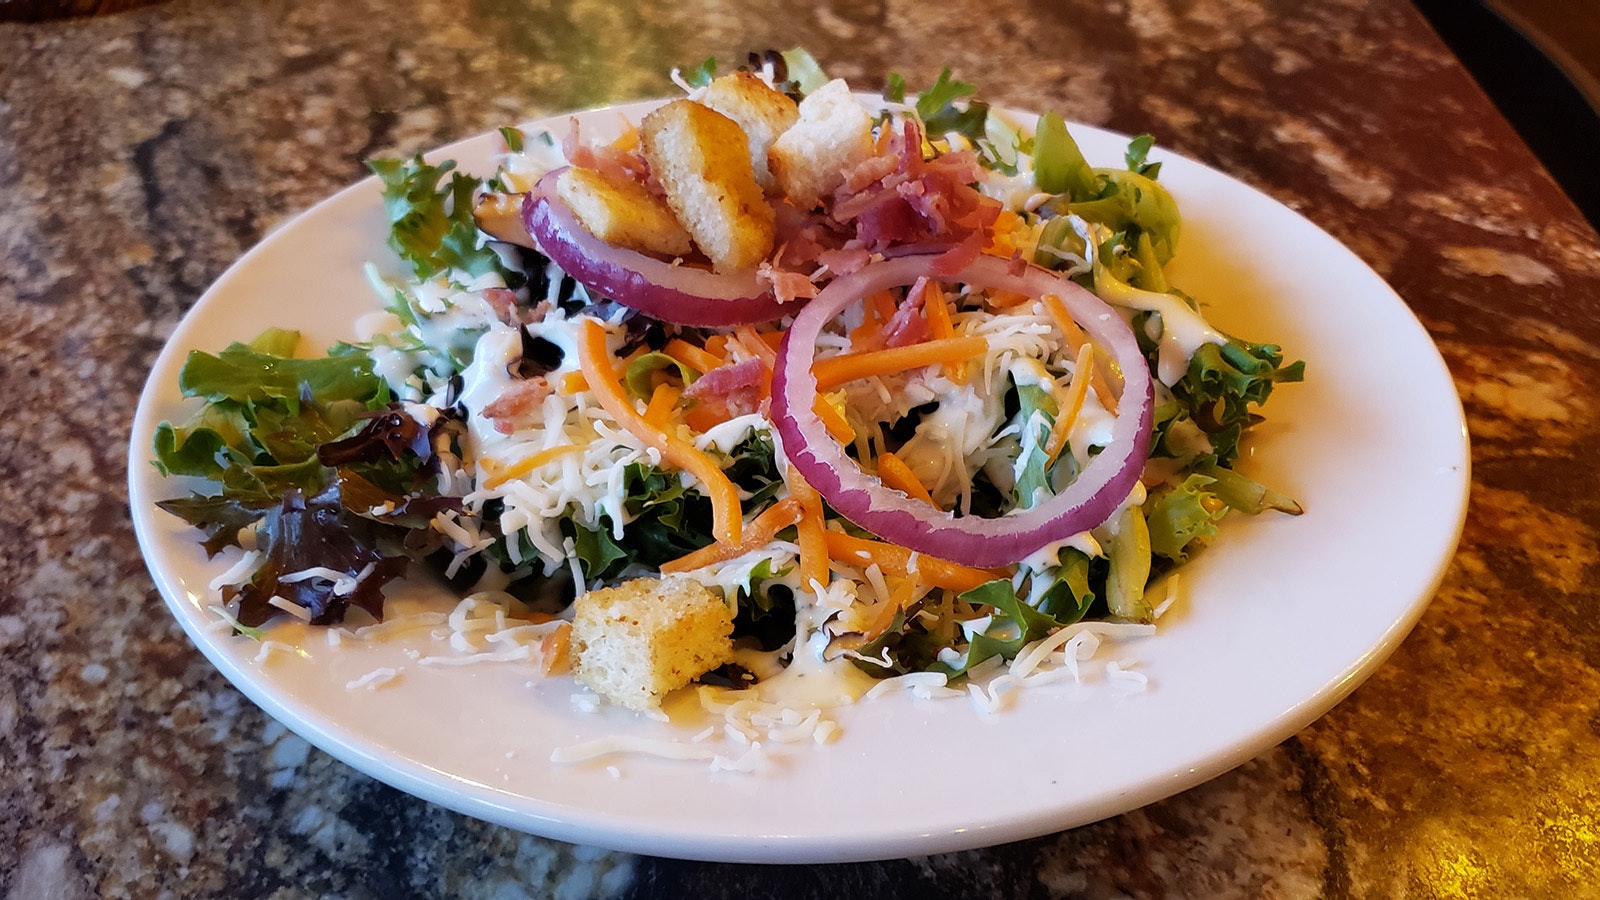 The salads at Michael's Big City Steakhouse are exceptionally fresh.